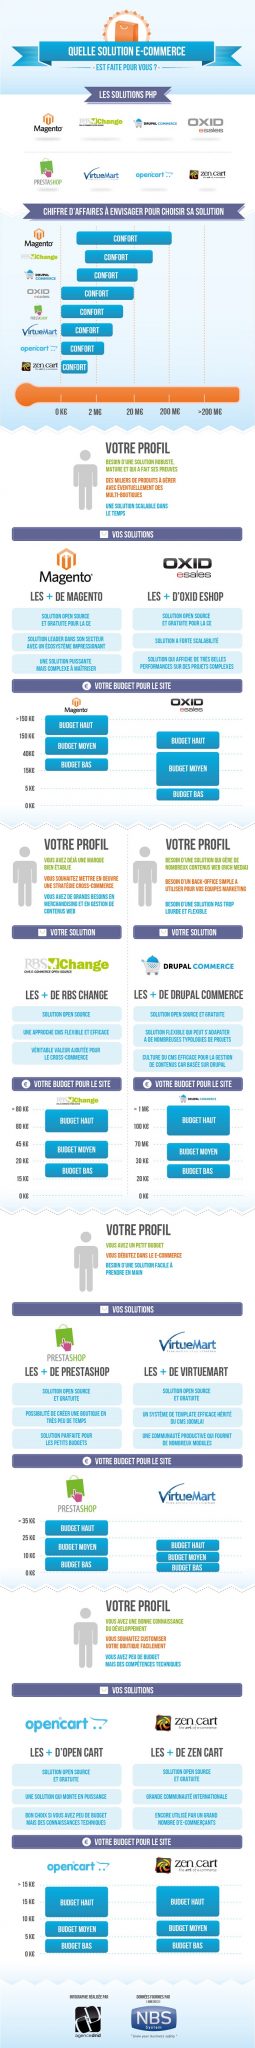 Infographie - ecommerce